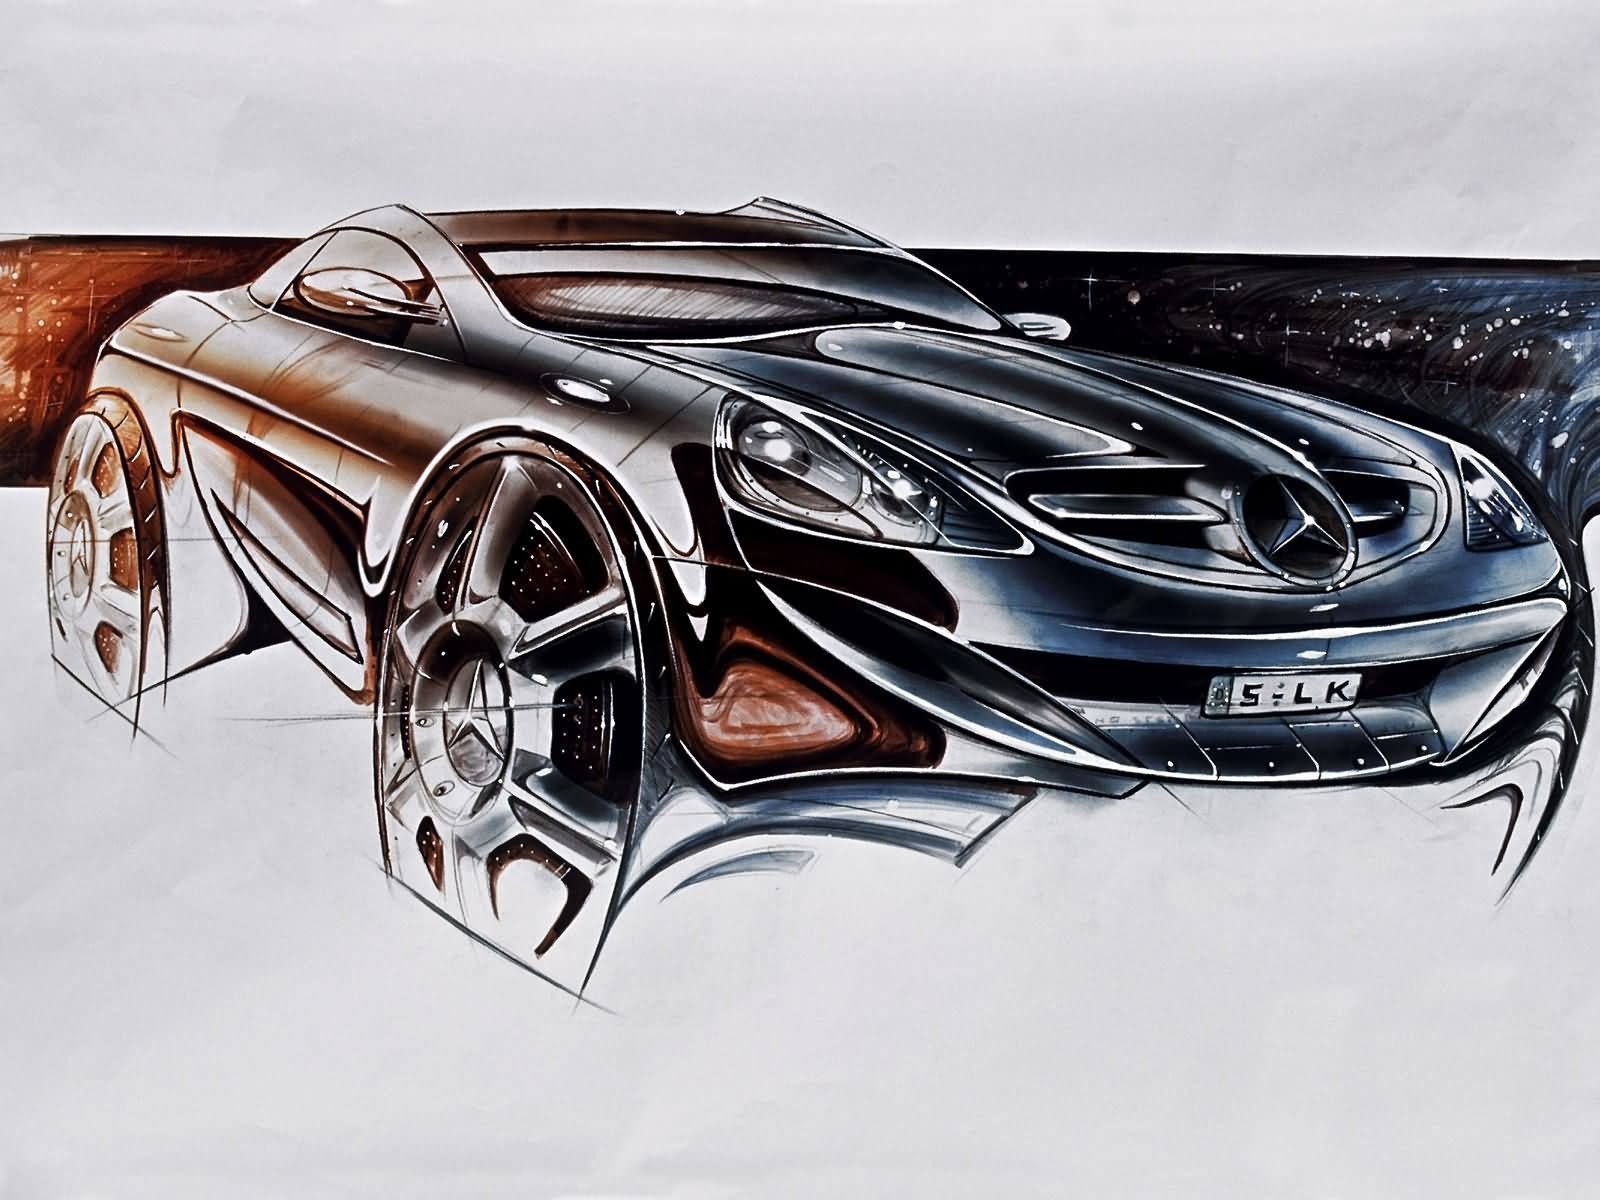 Official design sketch from Mercedes-Benz